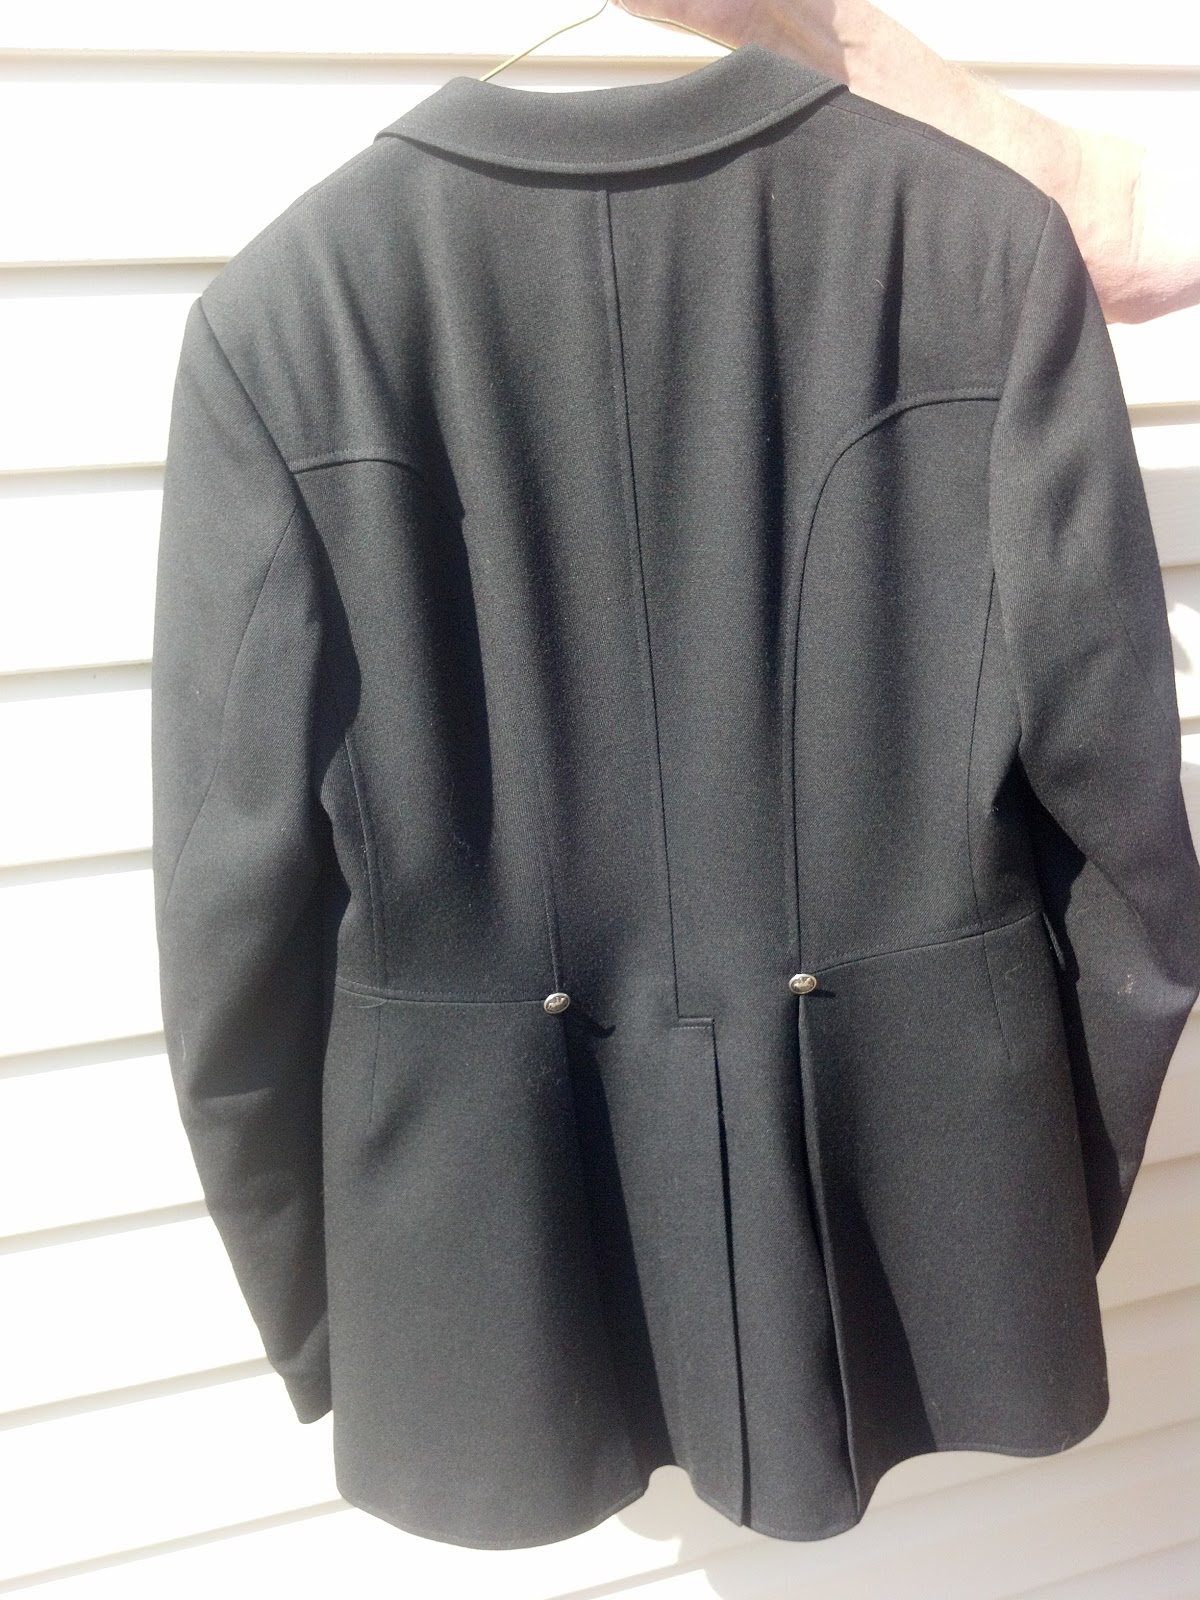 Behind the Bit: PIkeur Diana Jacket for Sale: The photos